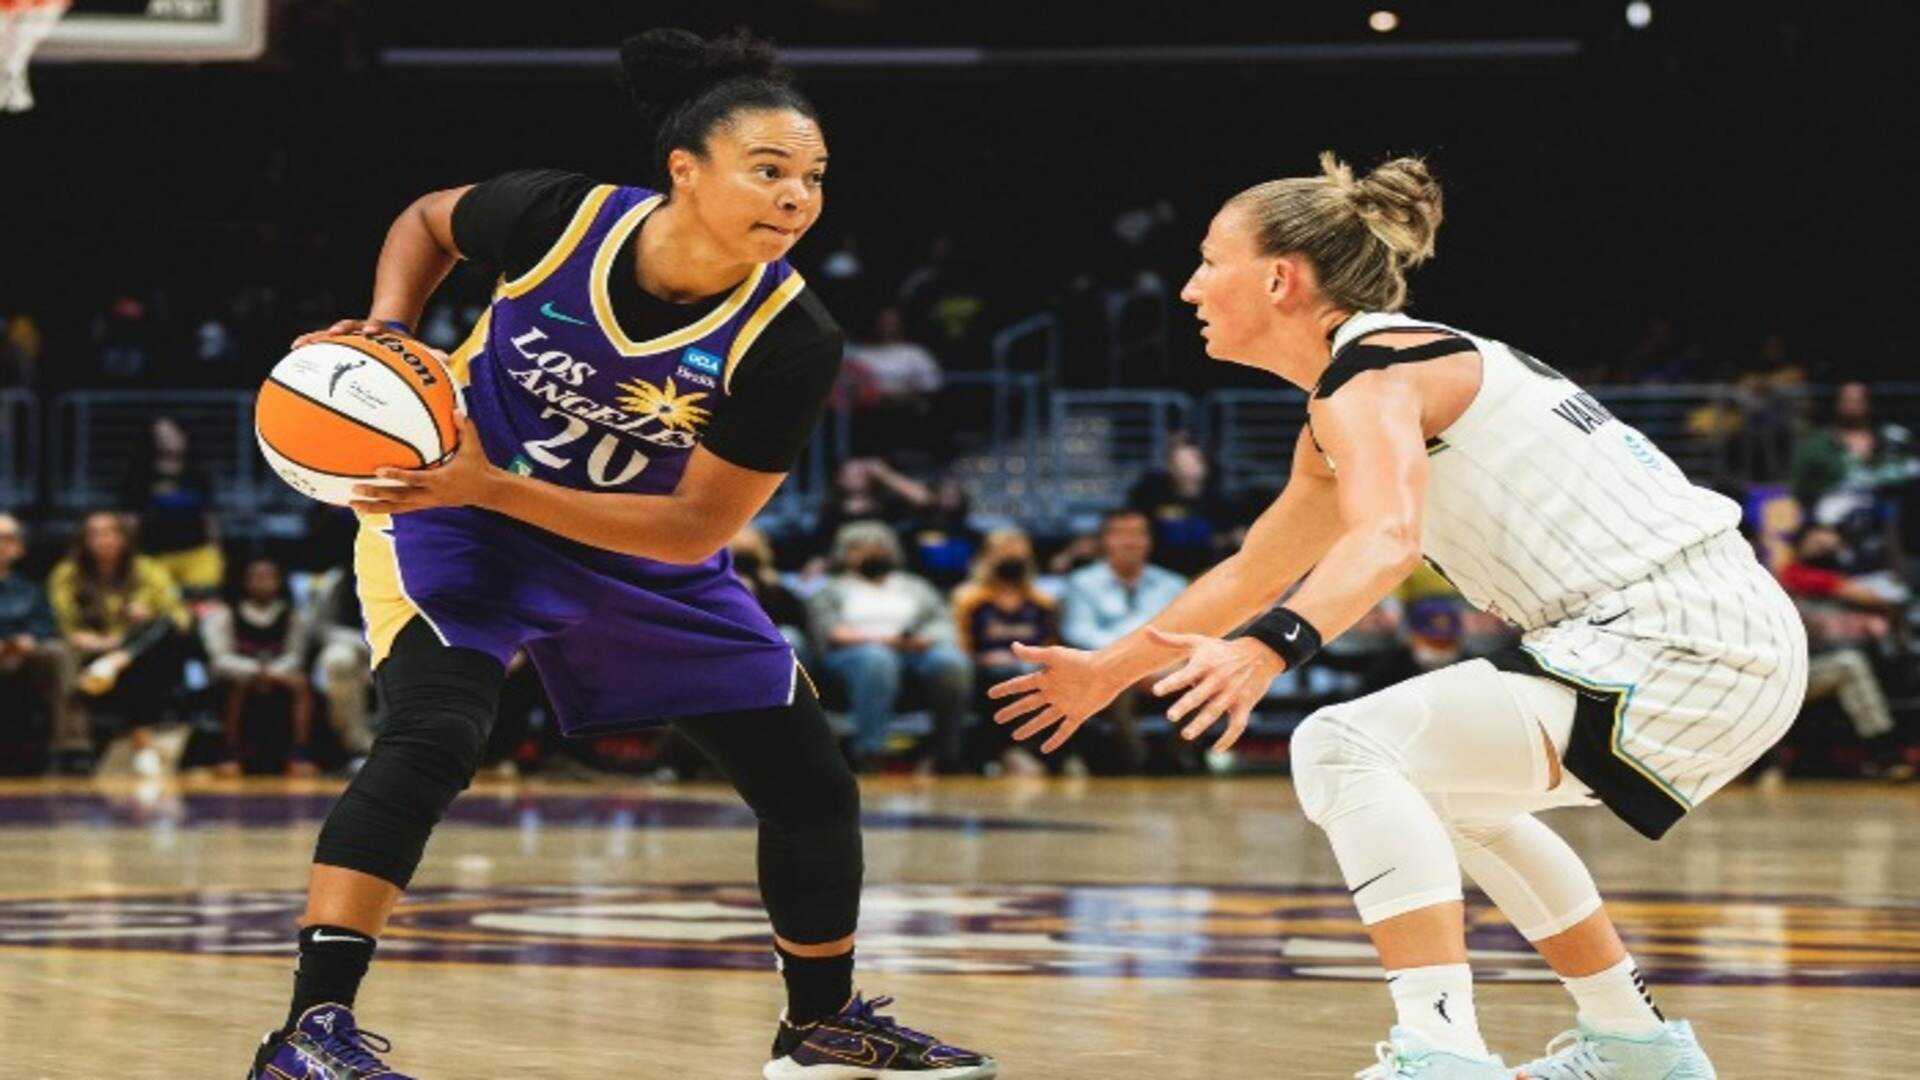 Indiana Fever vs Los Angeles Sparks WNBA Live Stream, Fixture, Schedule